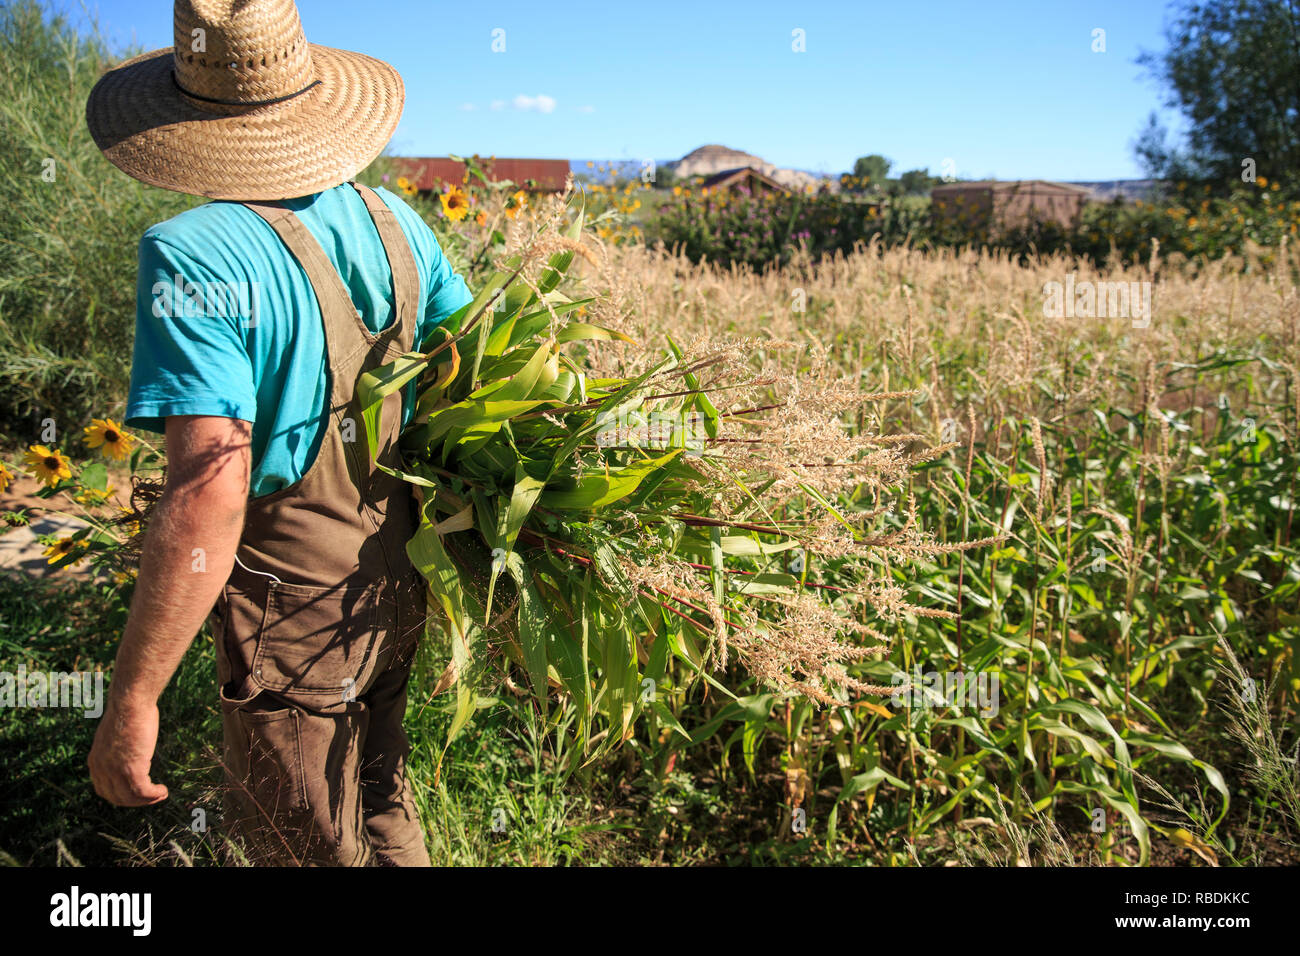 A farmer wearing a hat and overalls holds a large bunch of tall weeds under his arm on an organic farm field Stock Photo